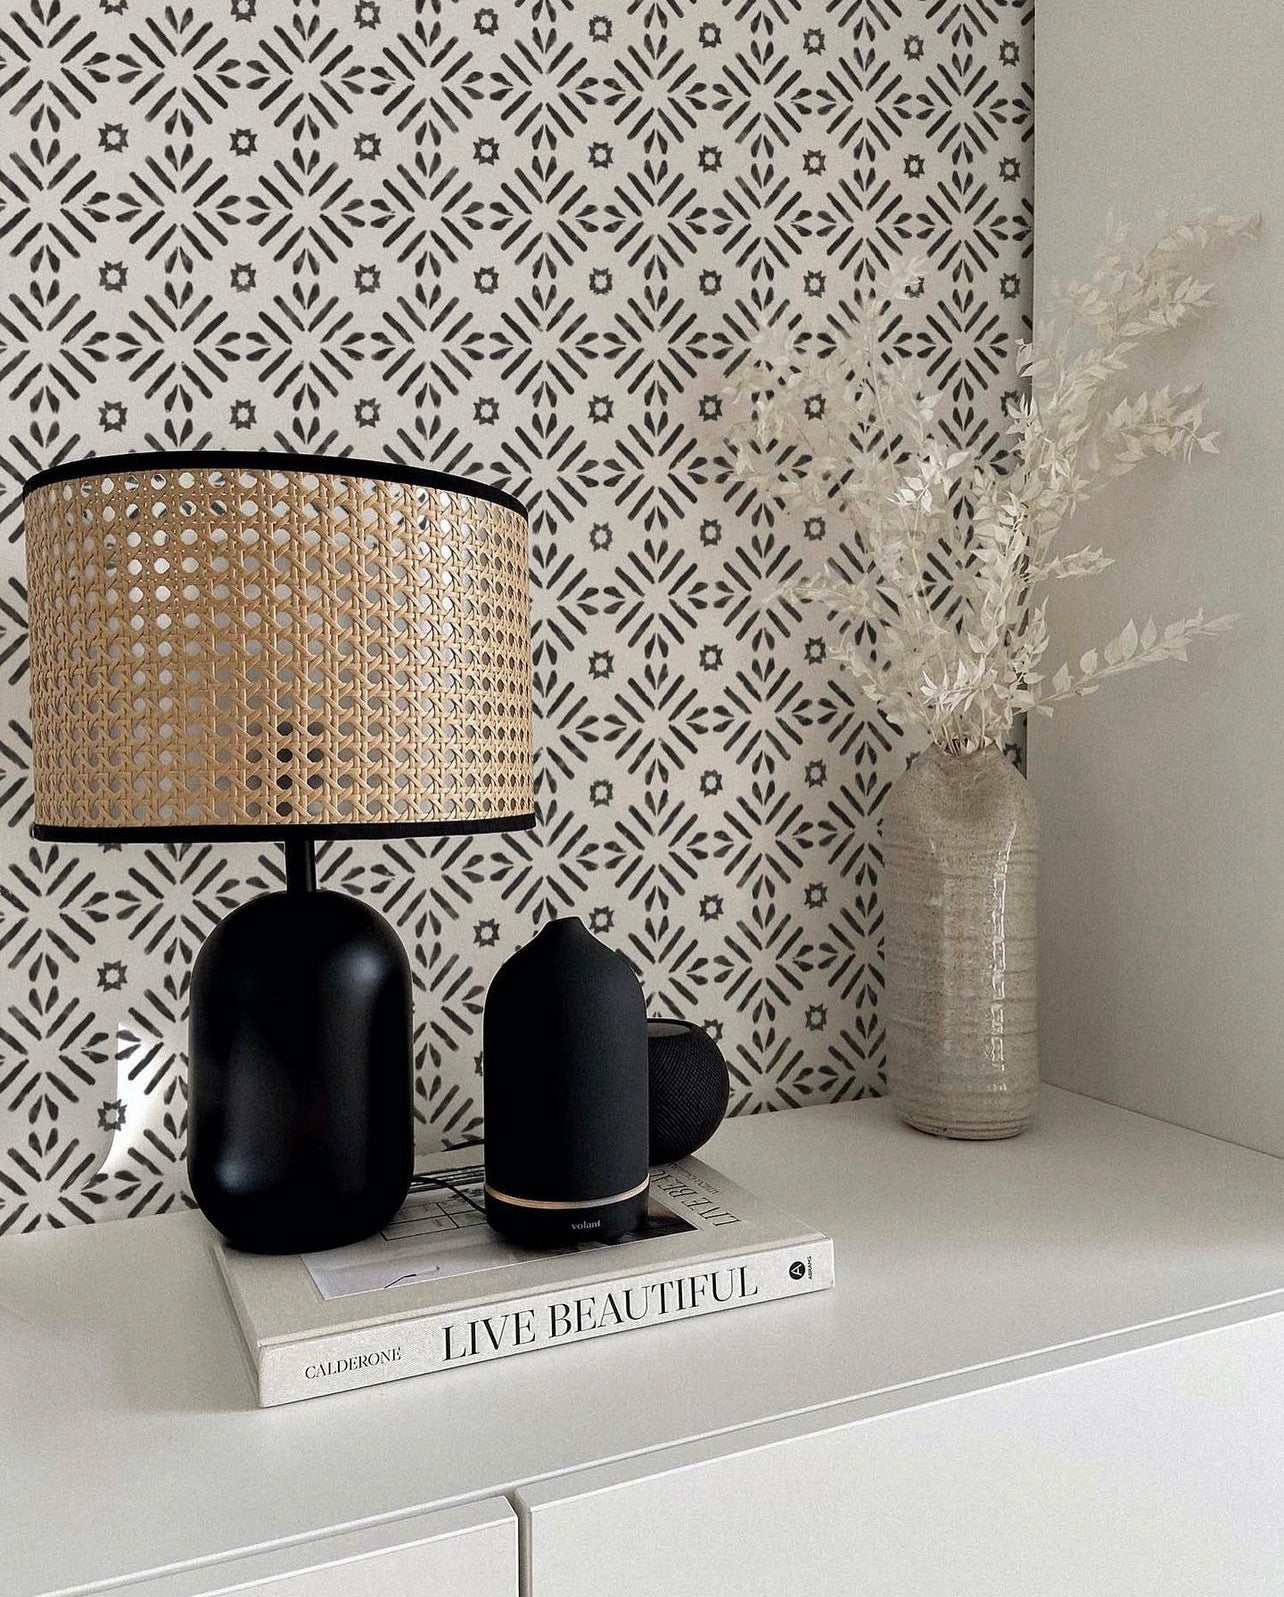 Modern workspace enhanced by Geometric Wallpaper III - Black, showcasing a detailed pattern of white geometric shapes on a black background, accompanied by a trendy lamp and decorative items on a sleek desk